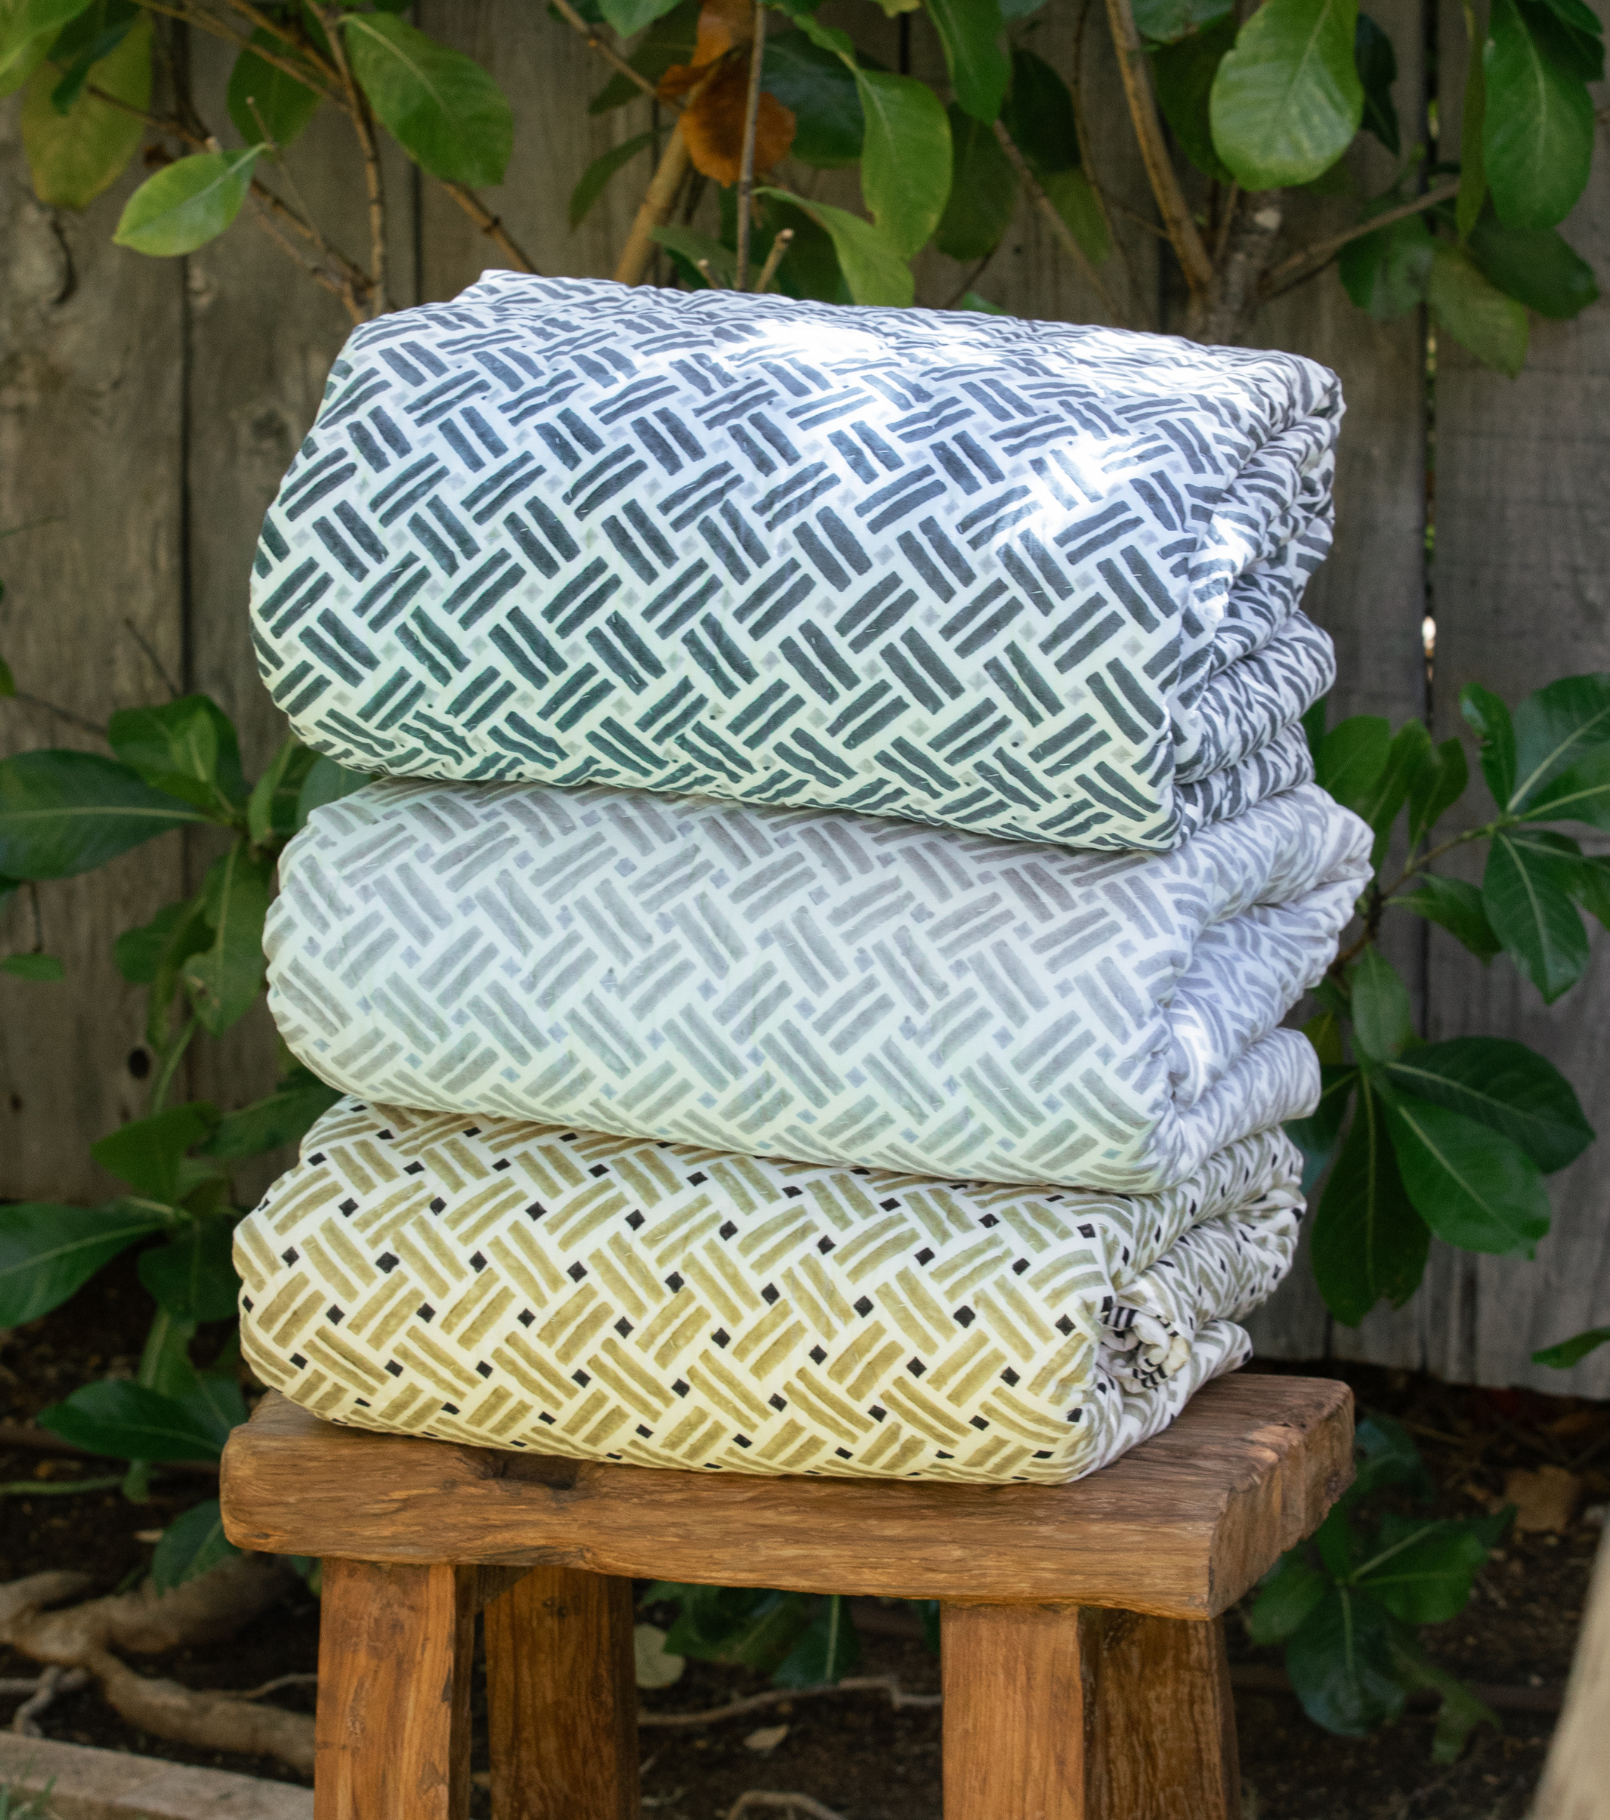 Averylily Big Island Quilts are blockprinted by hand. Available in three colors inspired by the natural beauty of the Hawaiian Islands.